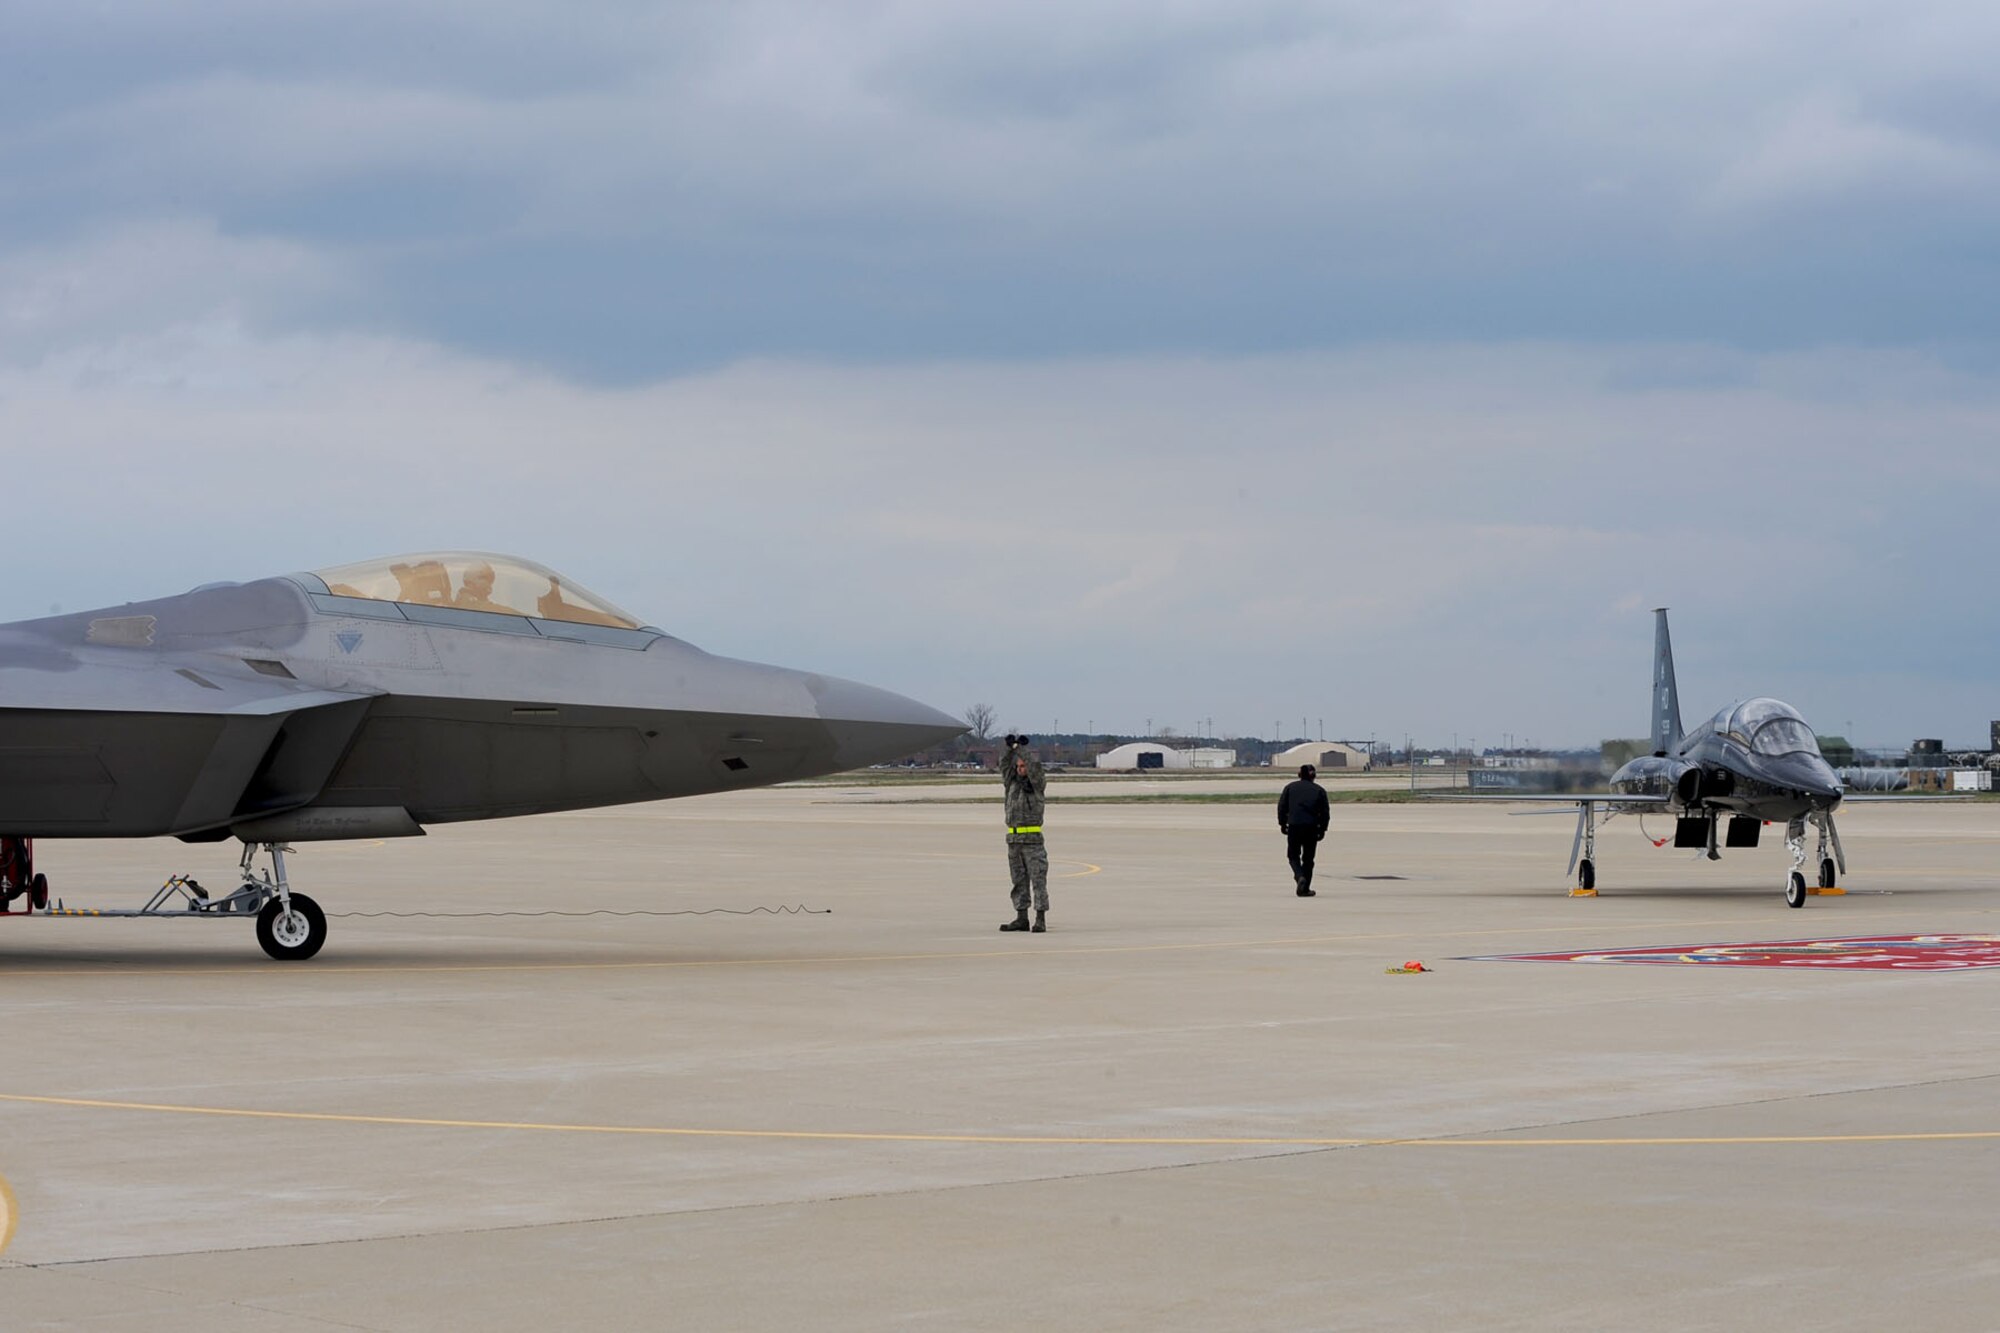 Col. Matthew Molloy, 1st Fighter Wing commander, taxis an F-22 Raptor onto Langley Air Force Base, Va., April 1 with Col. Kevin Mastin, 1 FW vice commander, following in a T-38 Talon. The T-38, from Holloman AFB, N.M., is TDY here for six months to help train 1st FW pilots and prepare them for when it is permanently stationed here. (U.S. Air Force photo/Staff Sgt. Ashley Hawkins/Released) 